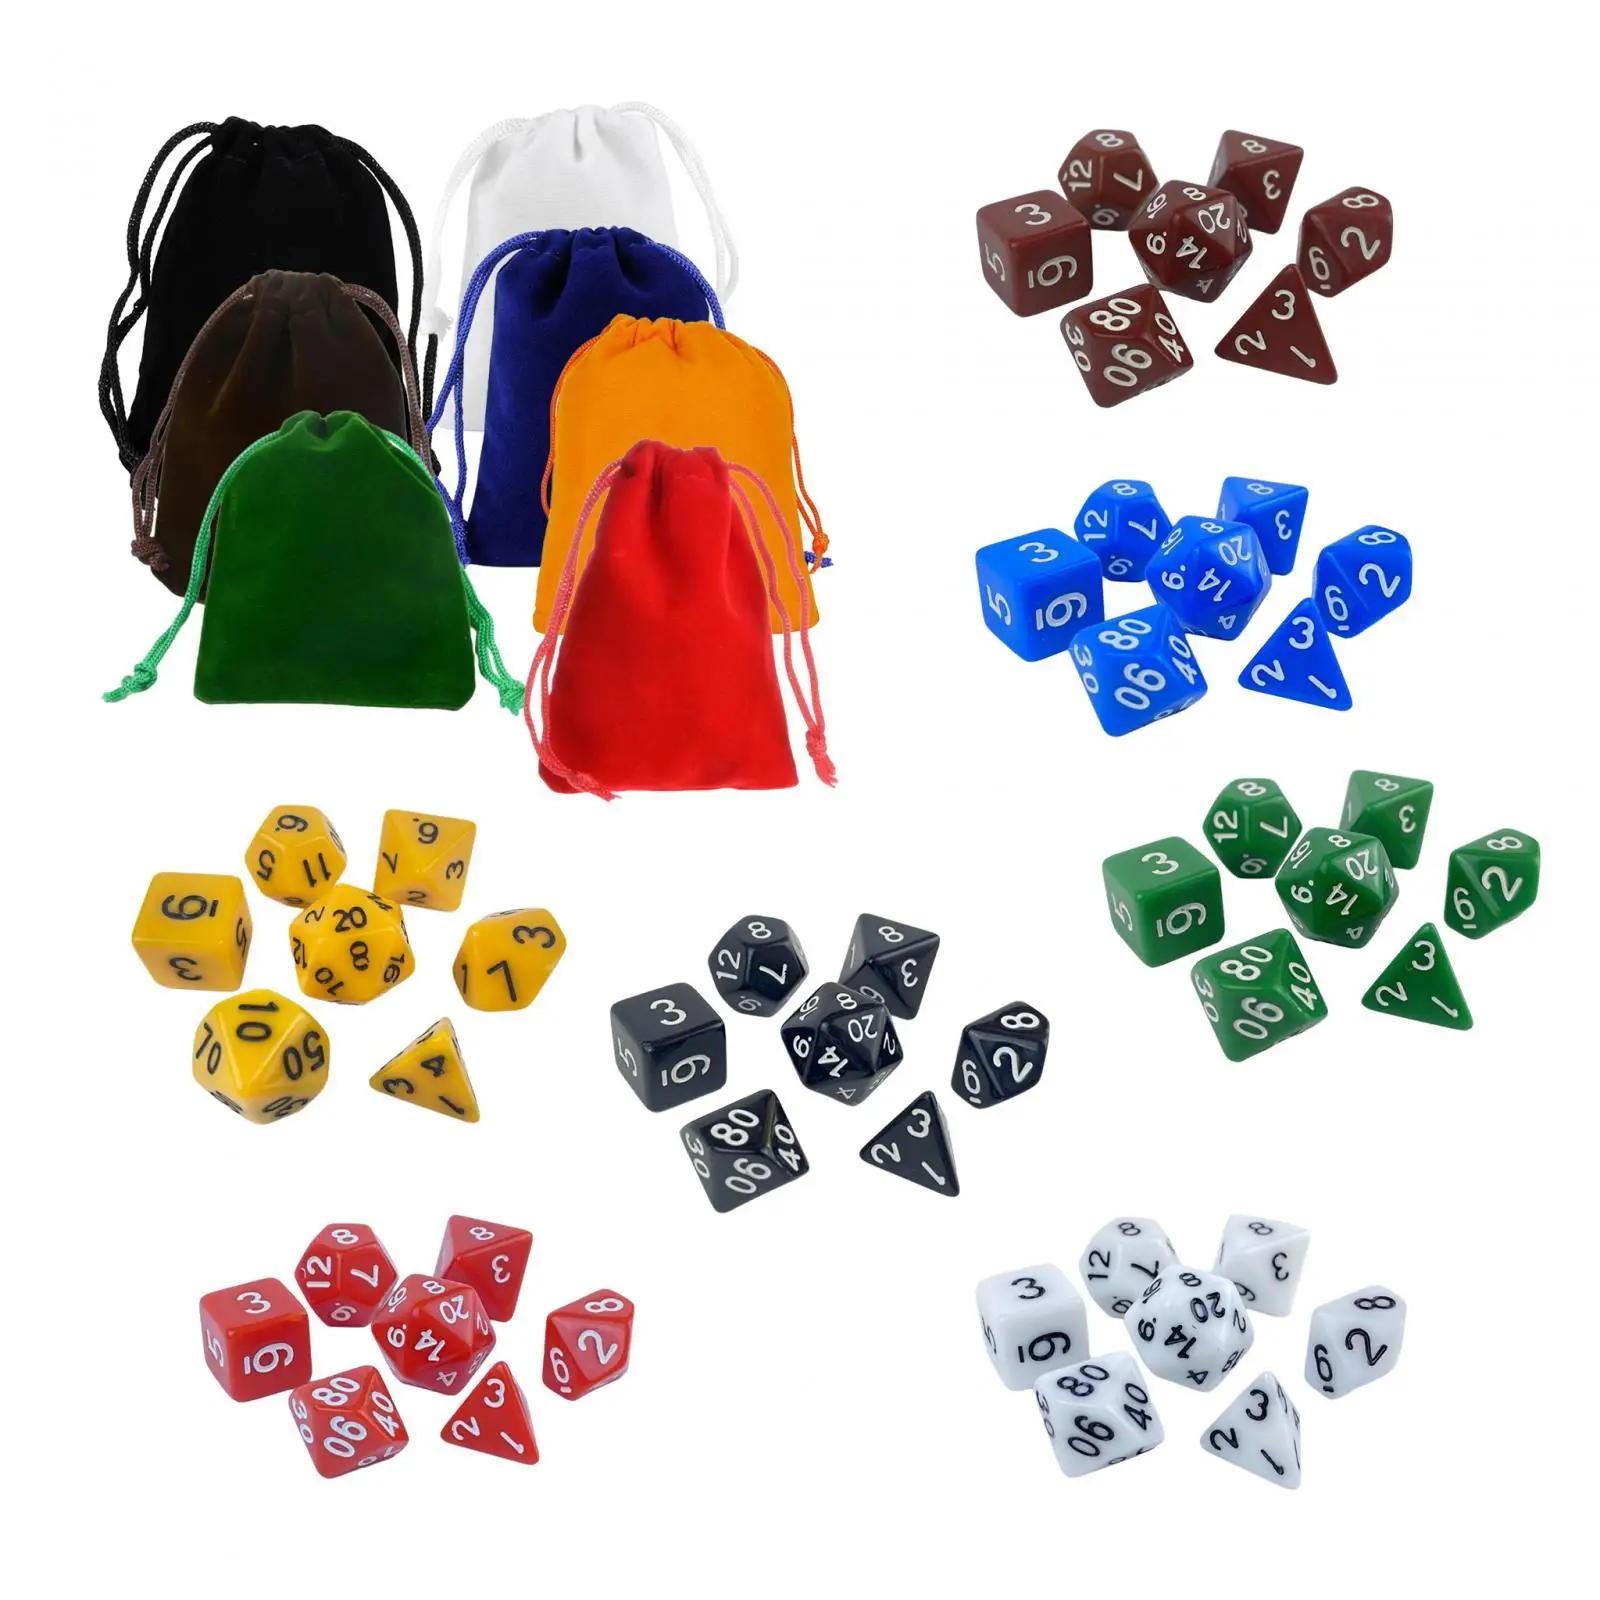 49Pcs Dice Set Math Teaching Toys Acrylic D20 D12 D10 D8 D6 D4 Multi Sided Game Dices for Party KTV Board Game Role Playing Game